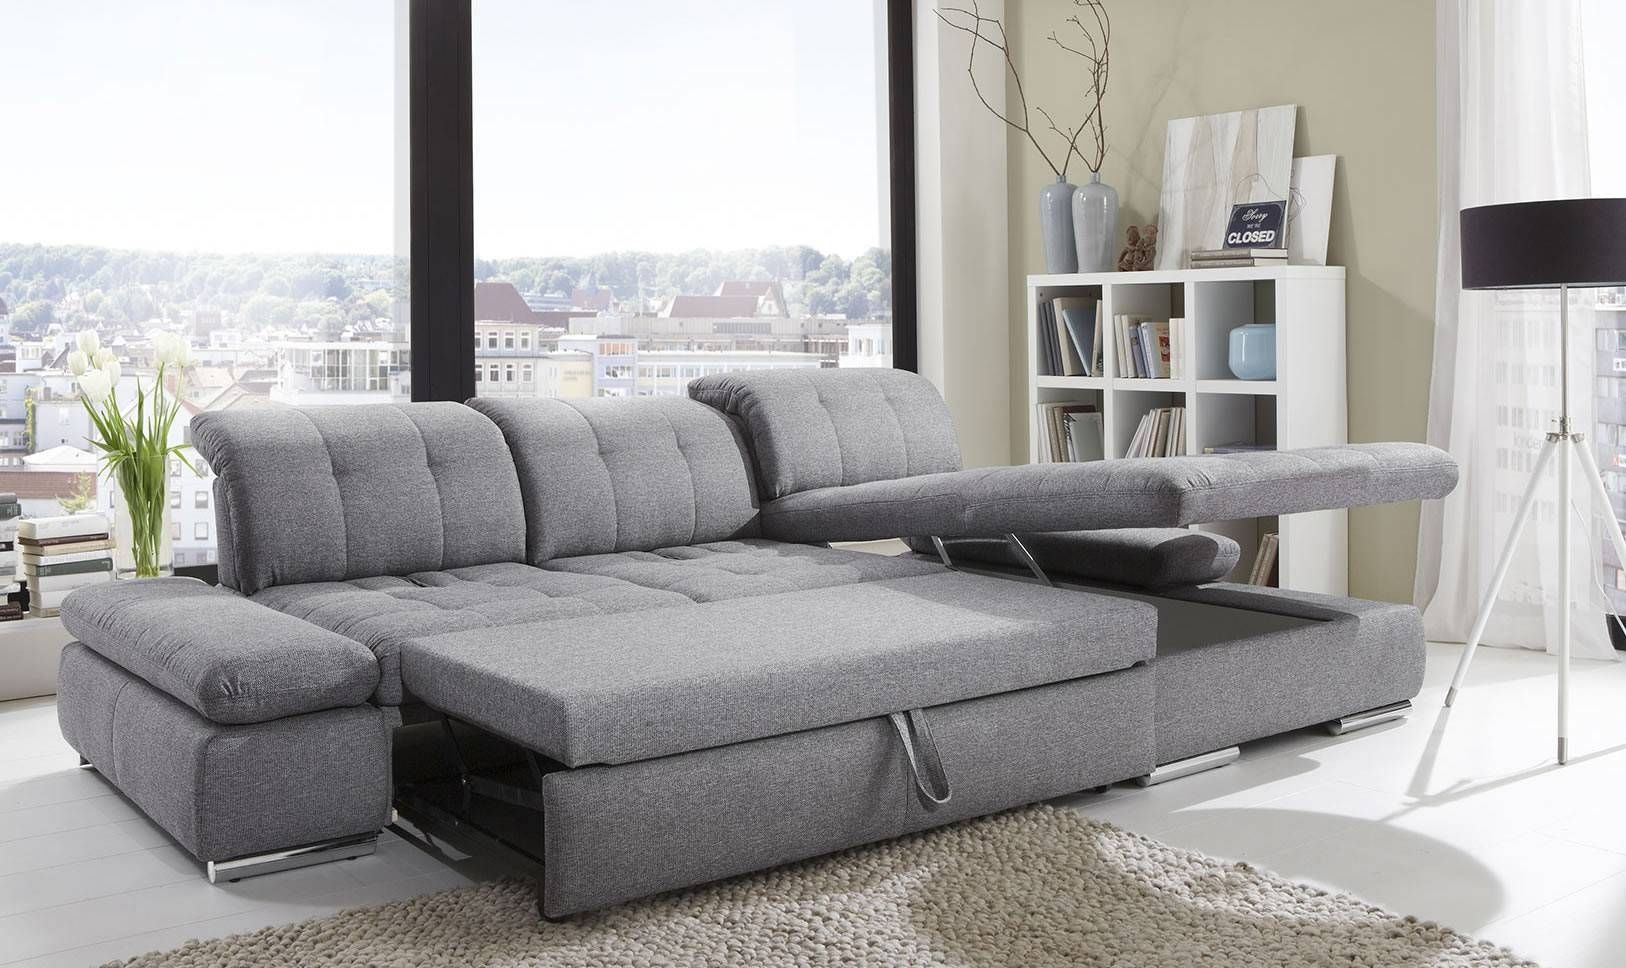 Alpine Sectional Sleeper Sofa, Right Arm Chaise Facing, Black Regarding White Fabric Sofas (View 26 of 30)